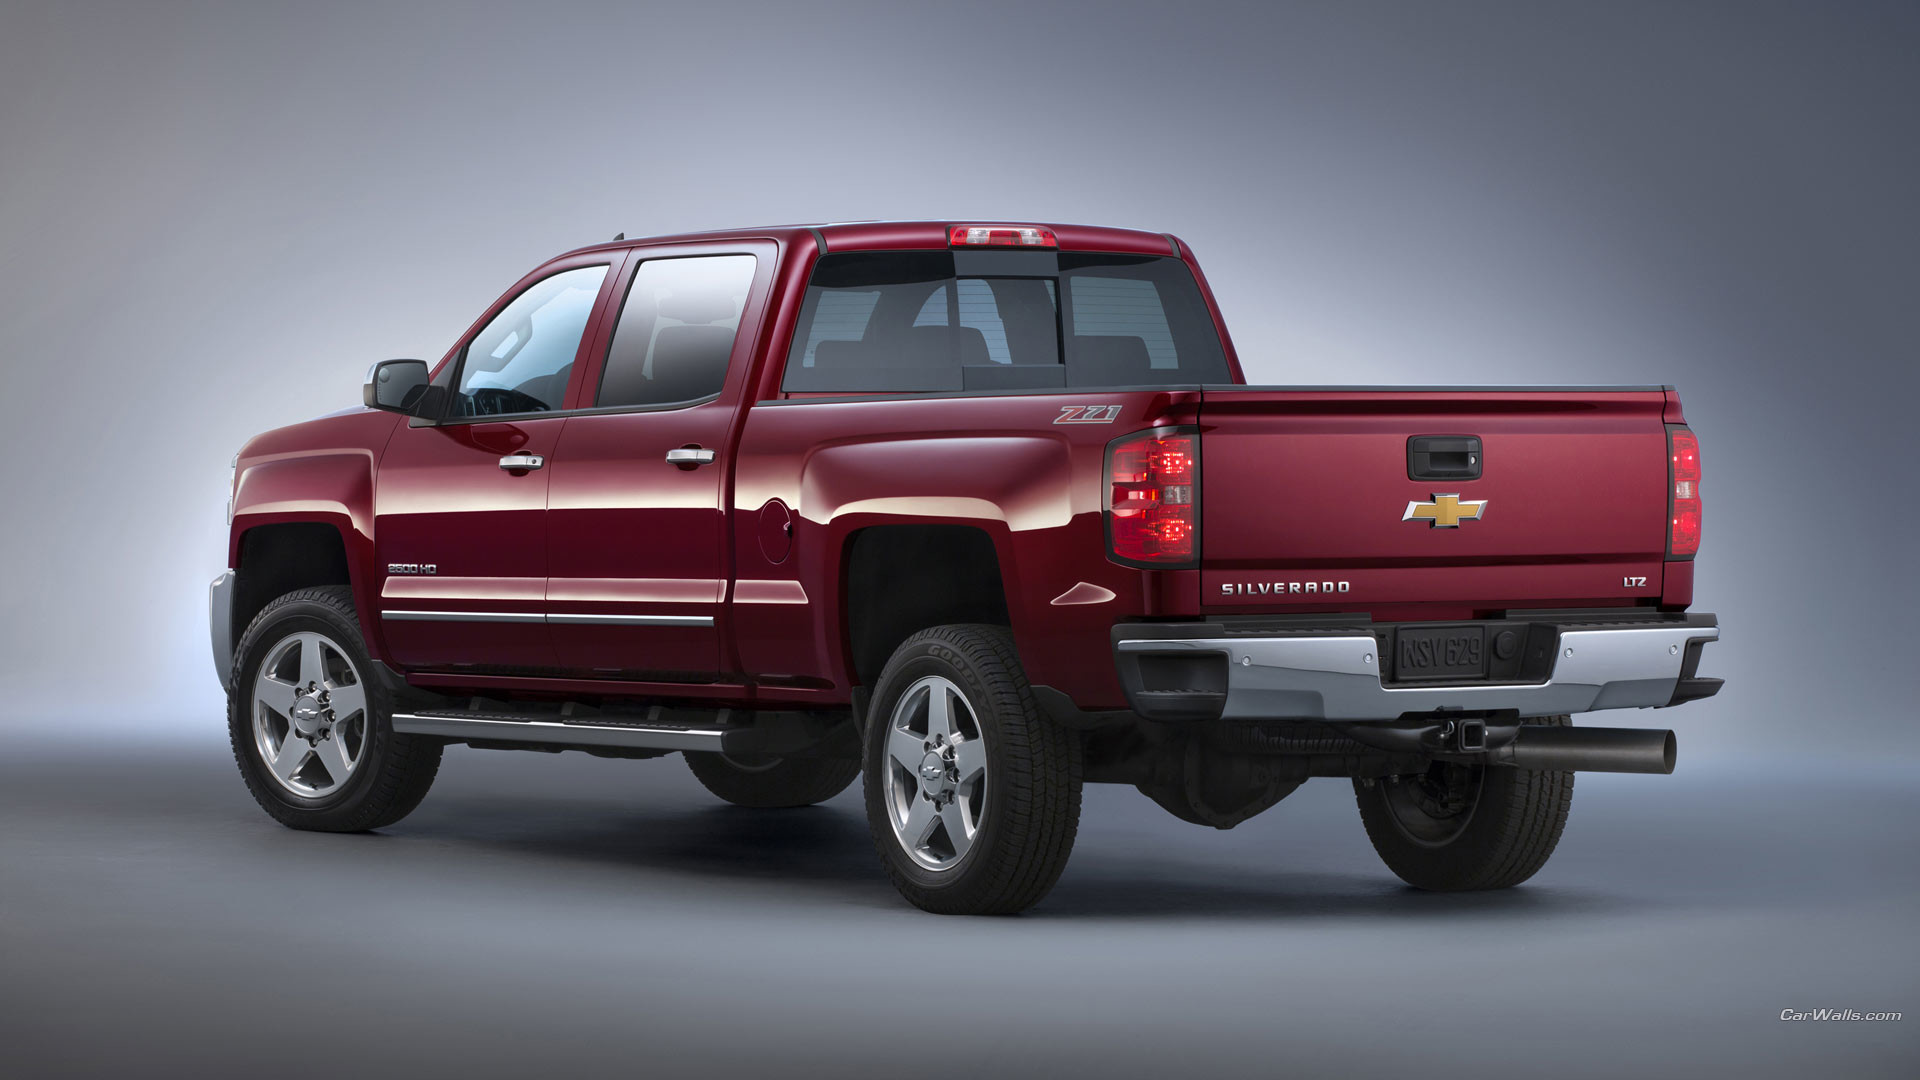 1920x1080 15 2015 Chevrolet Silverado HD HD Wallpapers | Backgrounds - Wallpaper Abyss